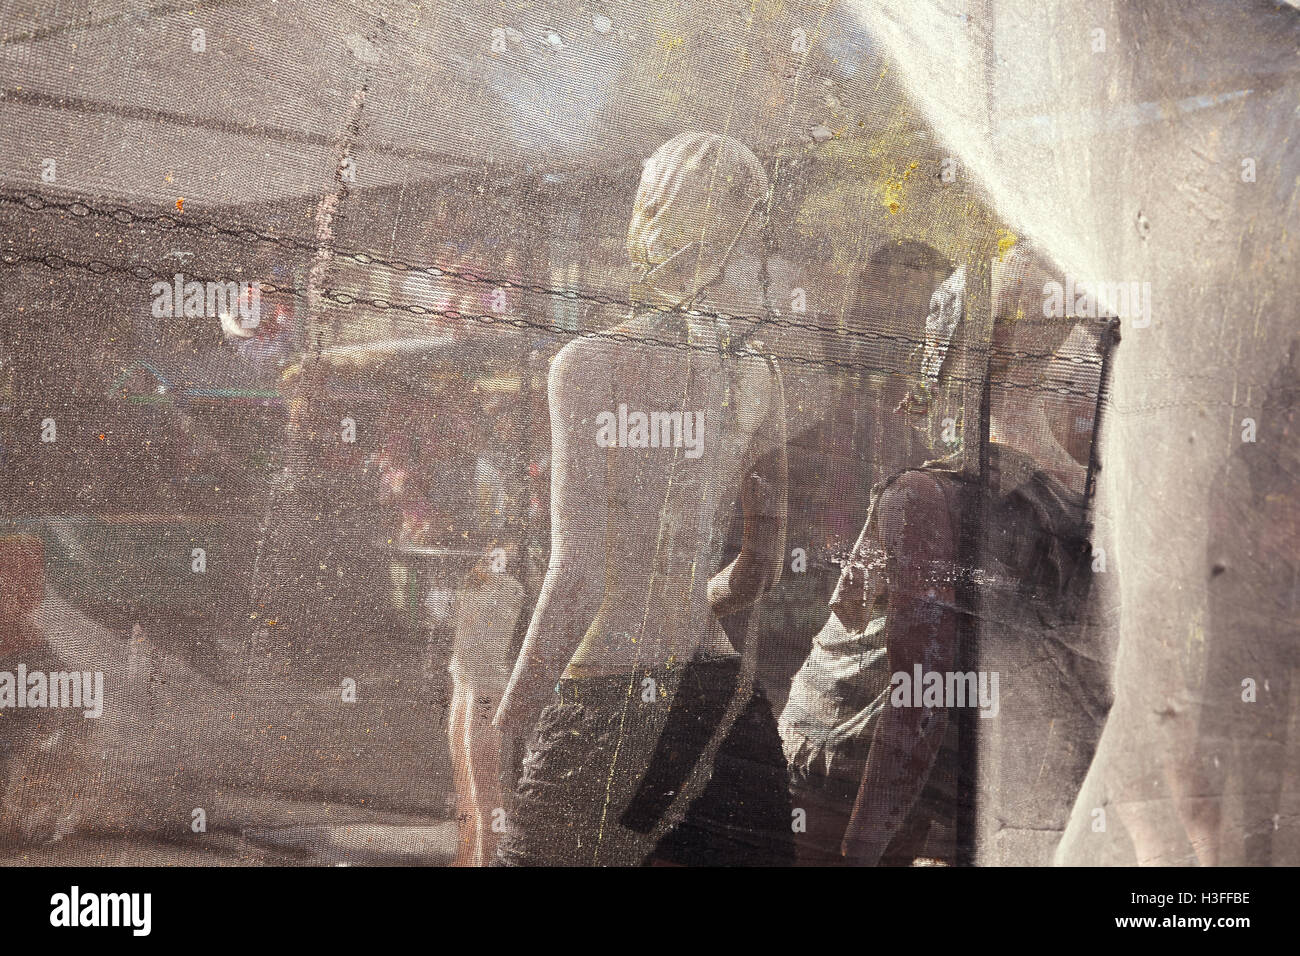 Manikins used as a target for paint ball, view through the safety netting behind. Stock Photo